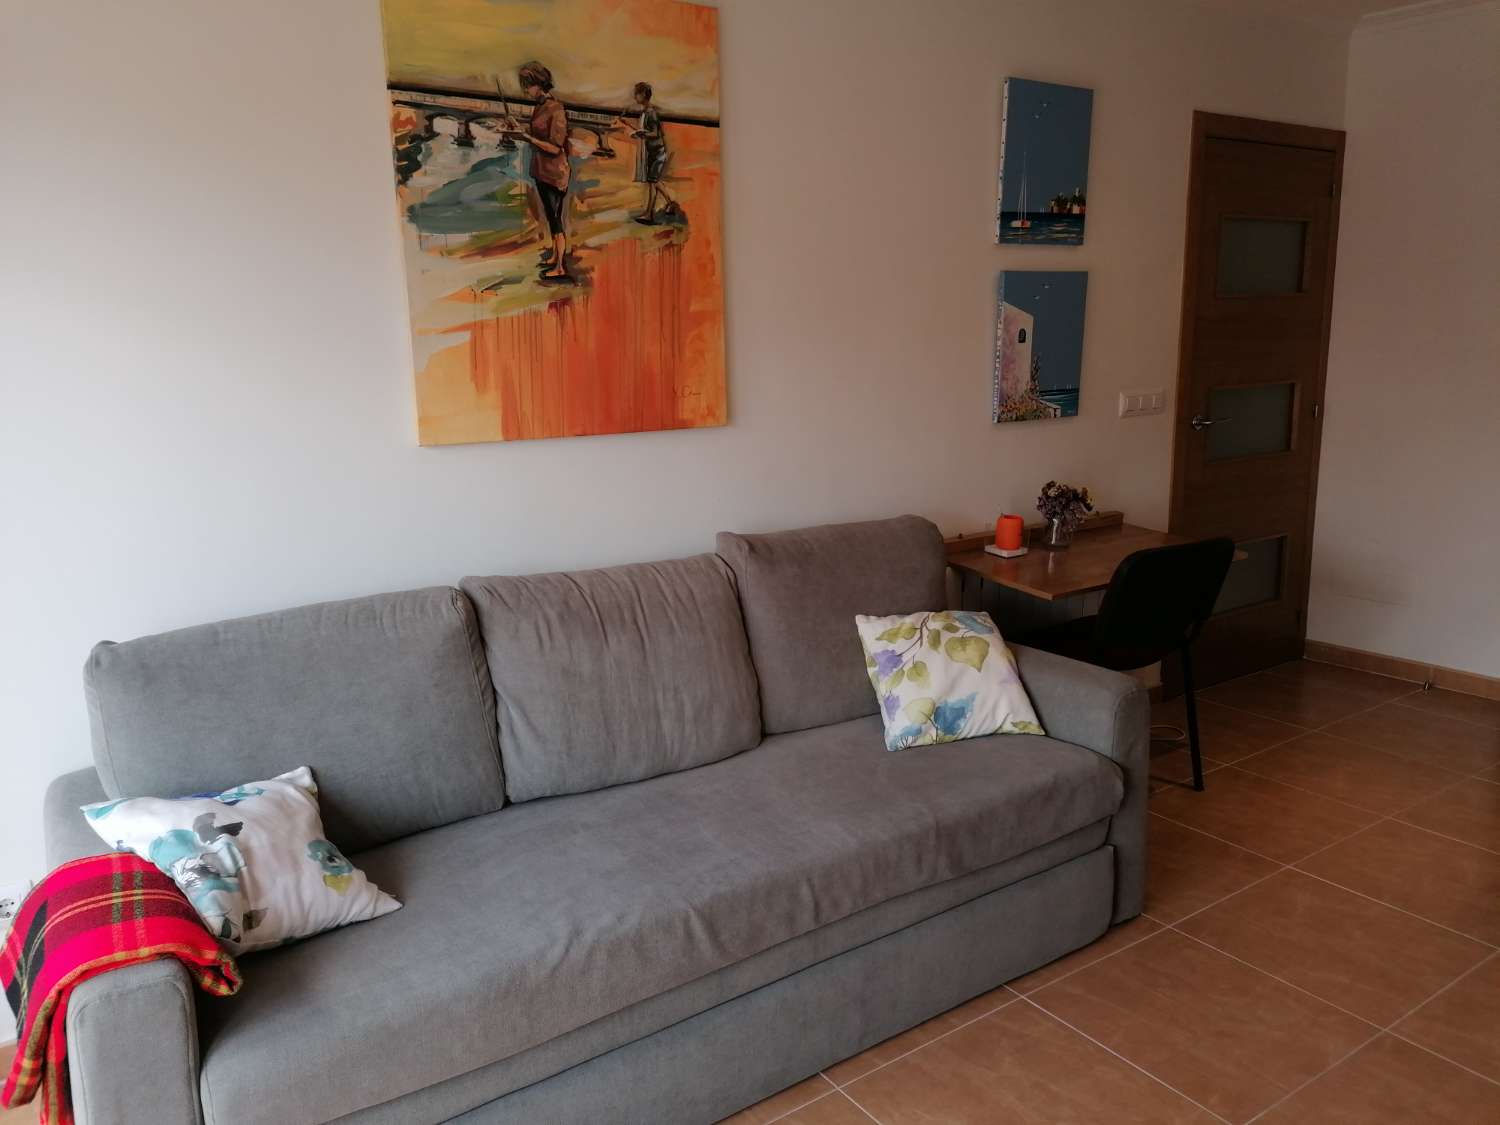 Sanxenxo: A6386: we rent a house for holiday season, 300 meters from Silgar